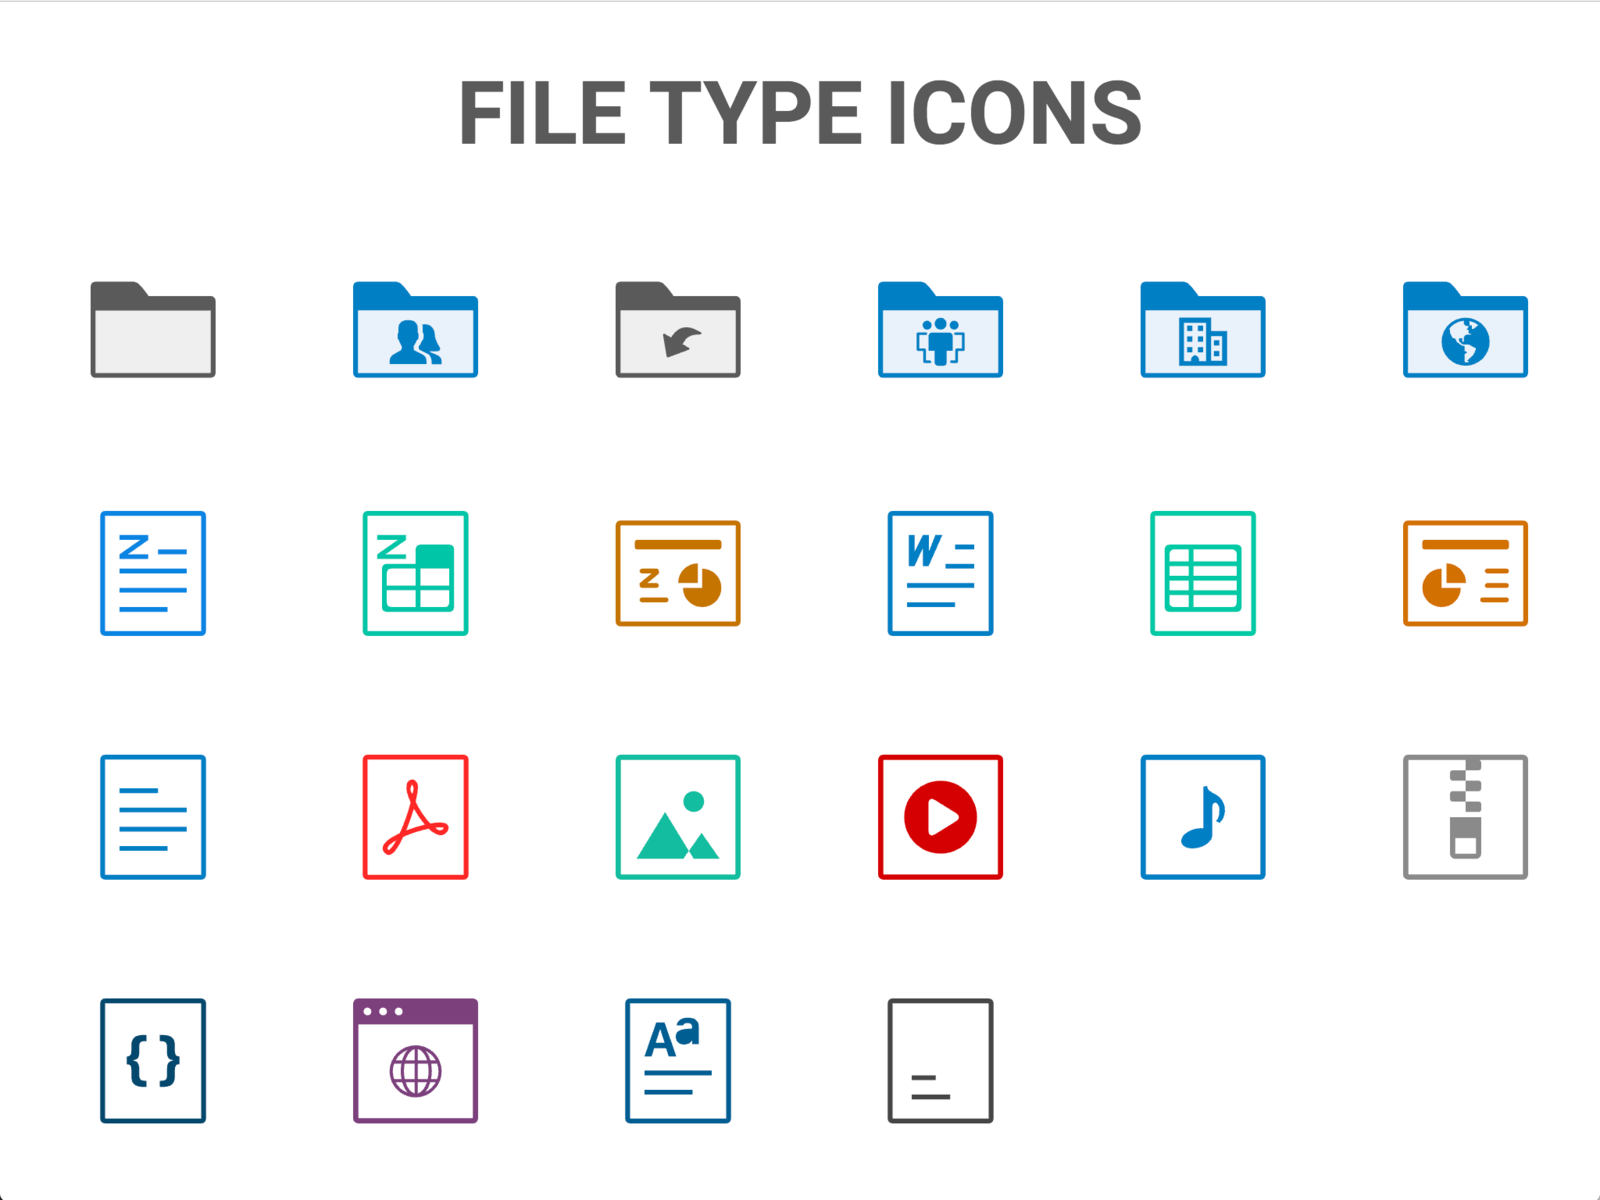 All file type icons by PrabuN on Dribbble